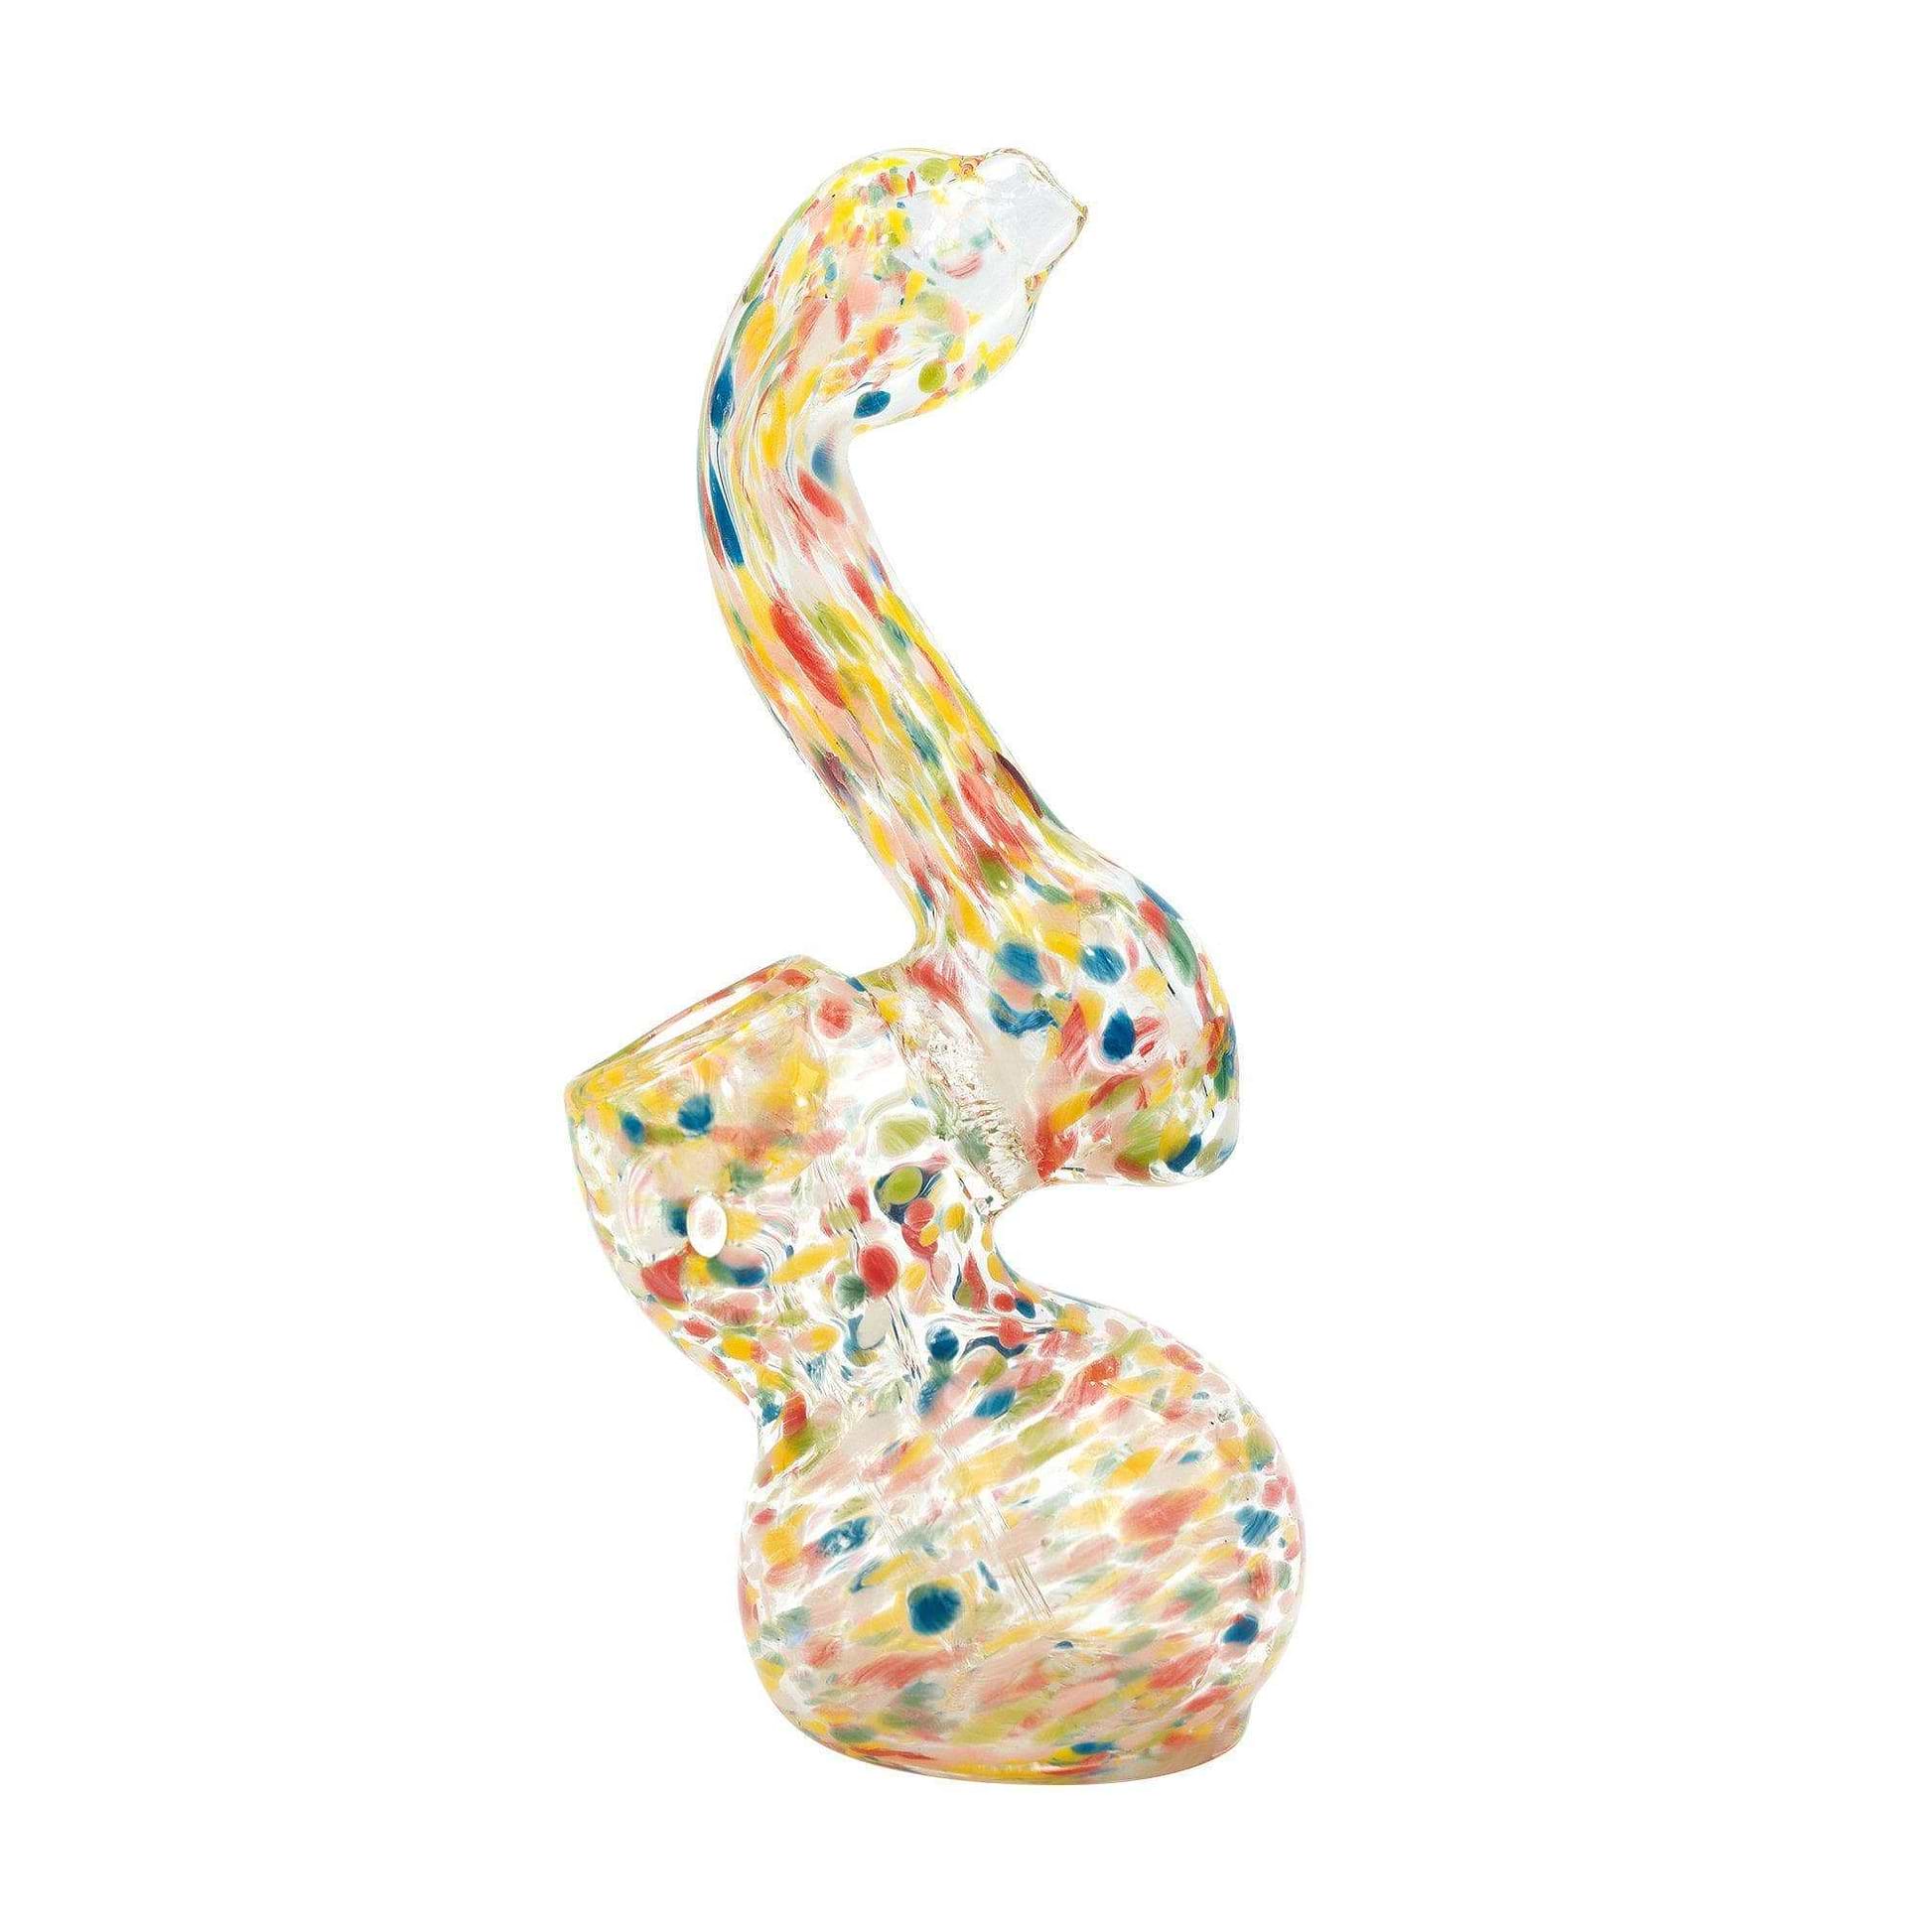 Unique 5-inch glass bubbler smoking device with colorful spot design